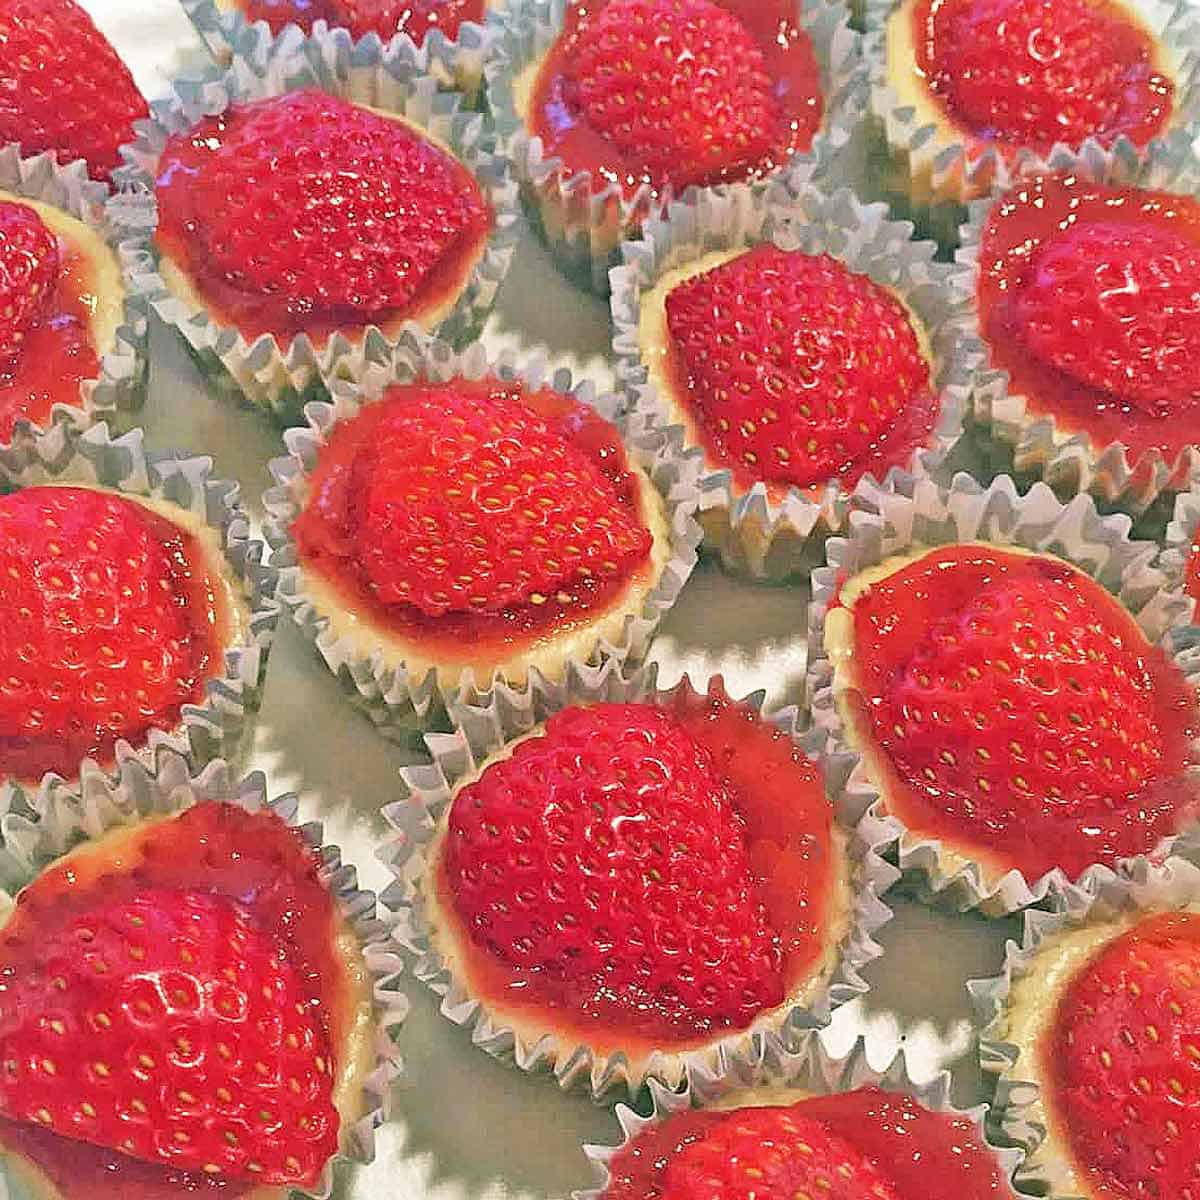 Mini strawberry cheesecakes topped with jam and a fresh berry.